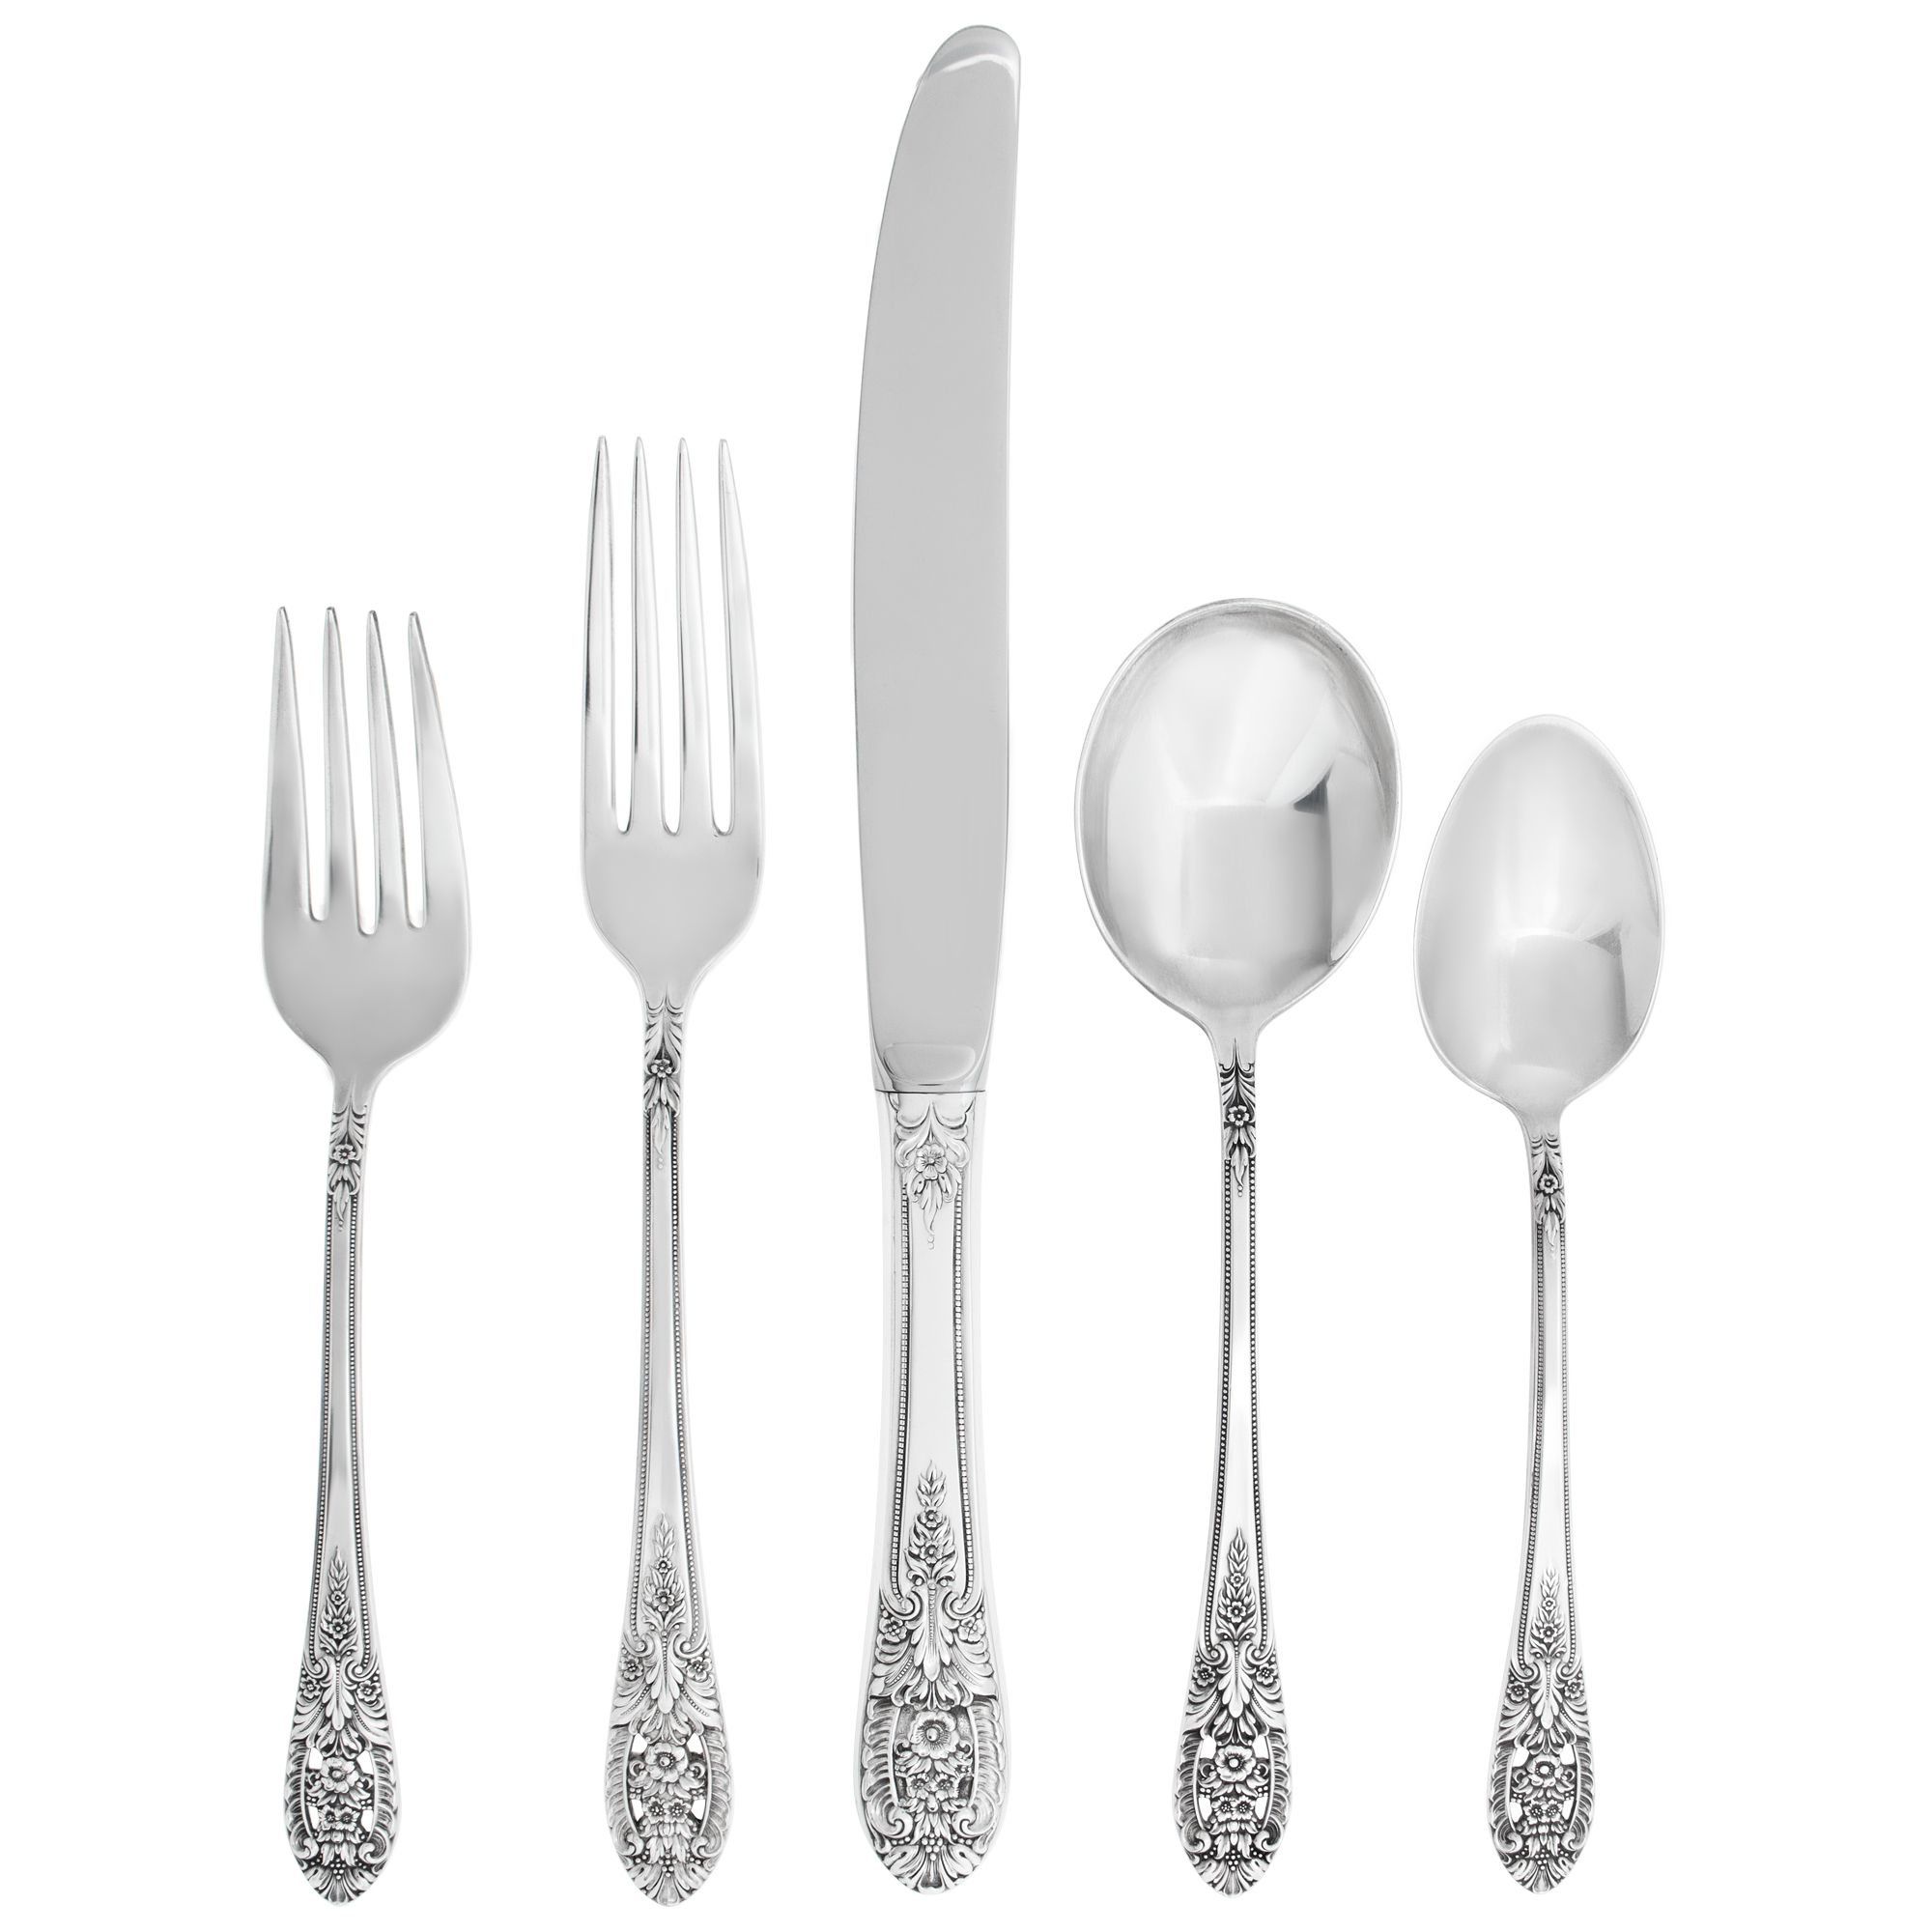 CROWN PRINCESS sterling silver flatware patented in 1949 by Fine Arts Company. 5 Place for 6. Total 30 pieces. image 1